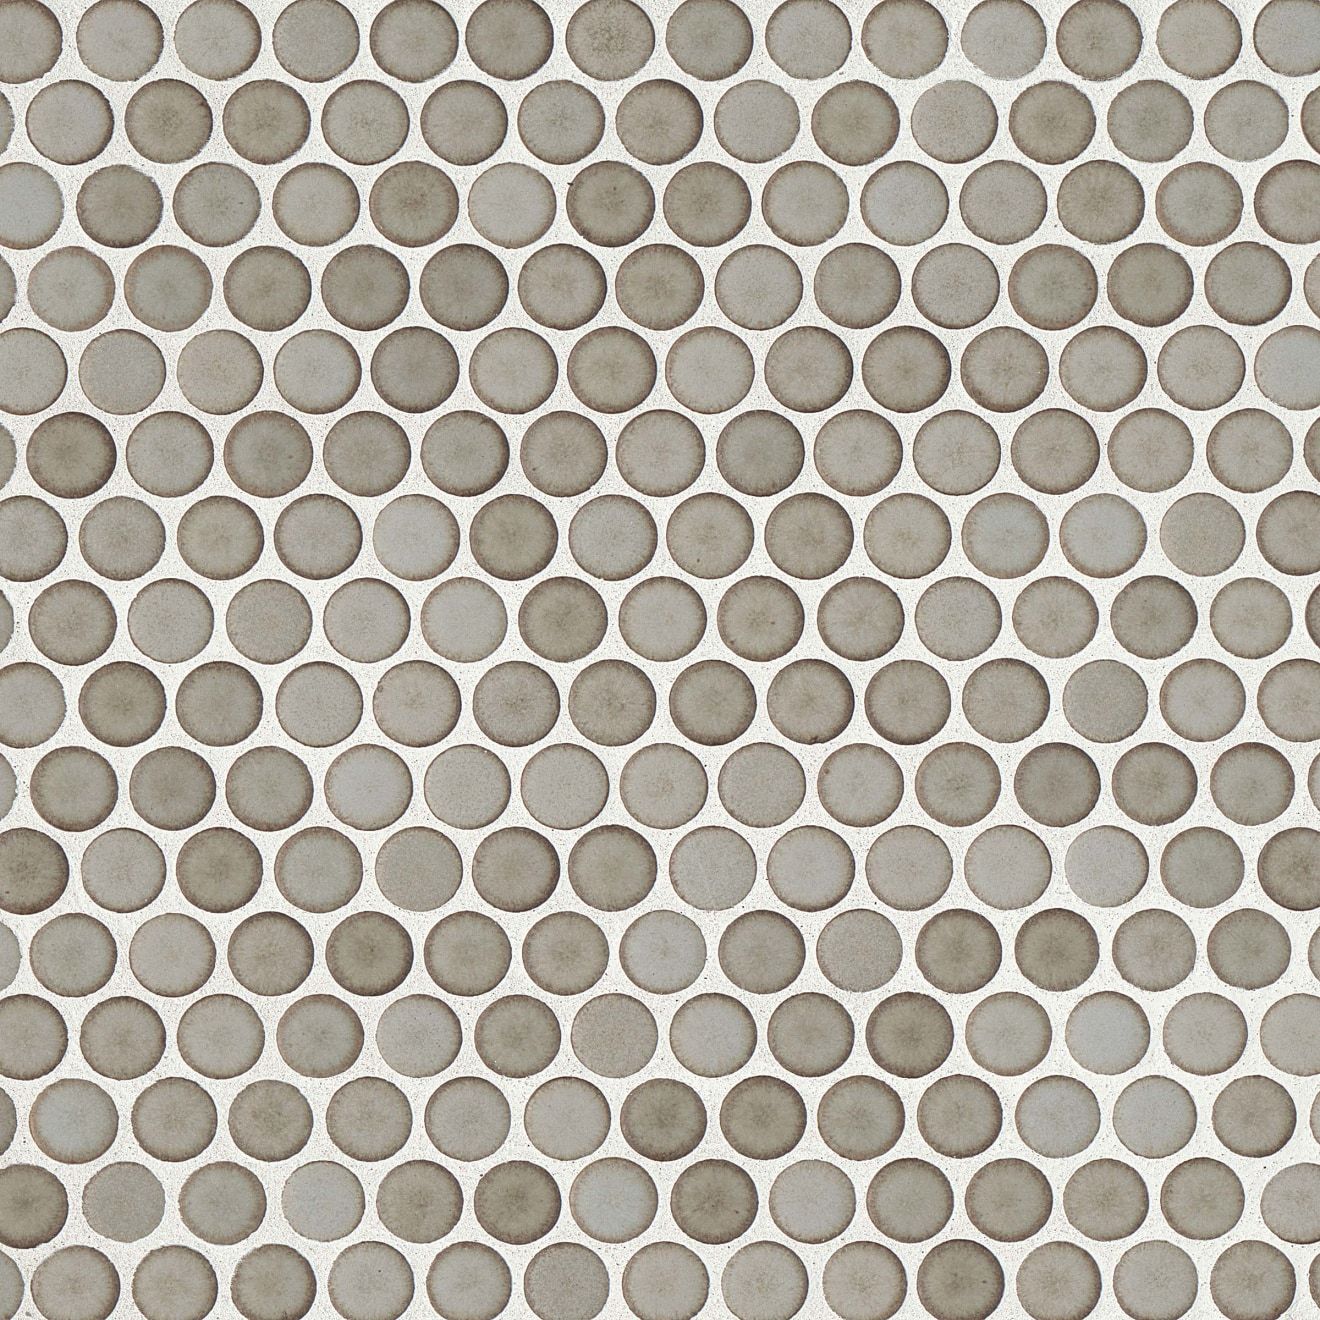 360 3/4" x 3/4" Penny Round Matte Mosaic Tile in Pumice | Bedrosians Tile & Stone